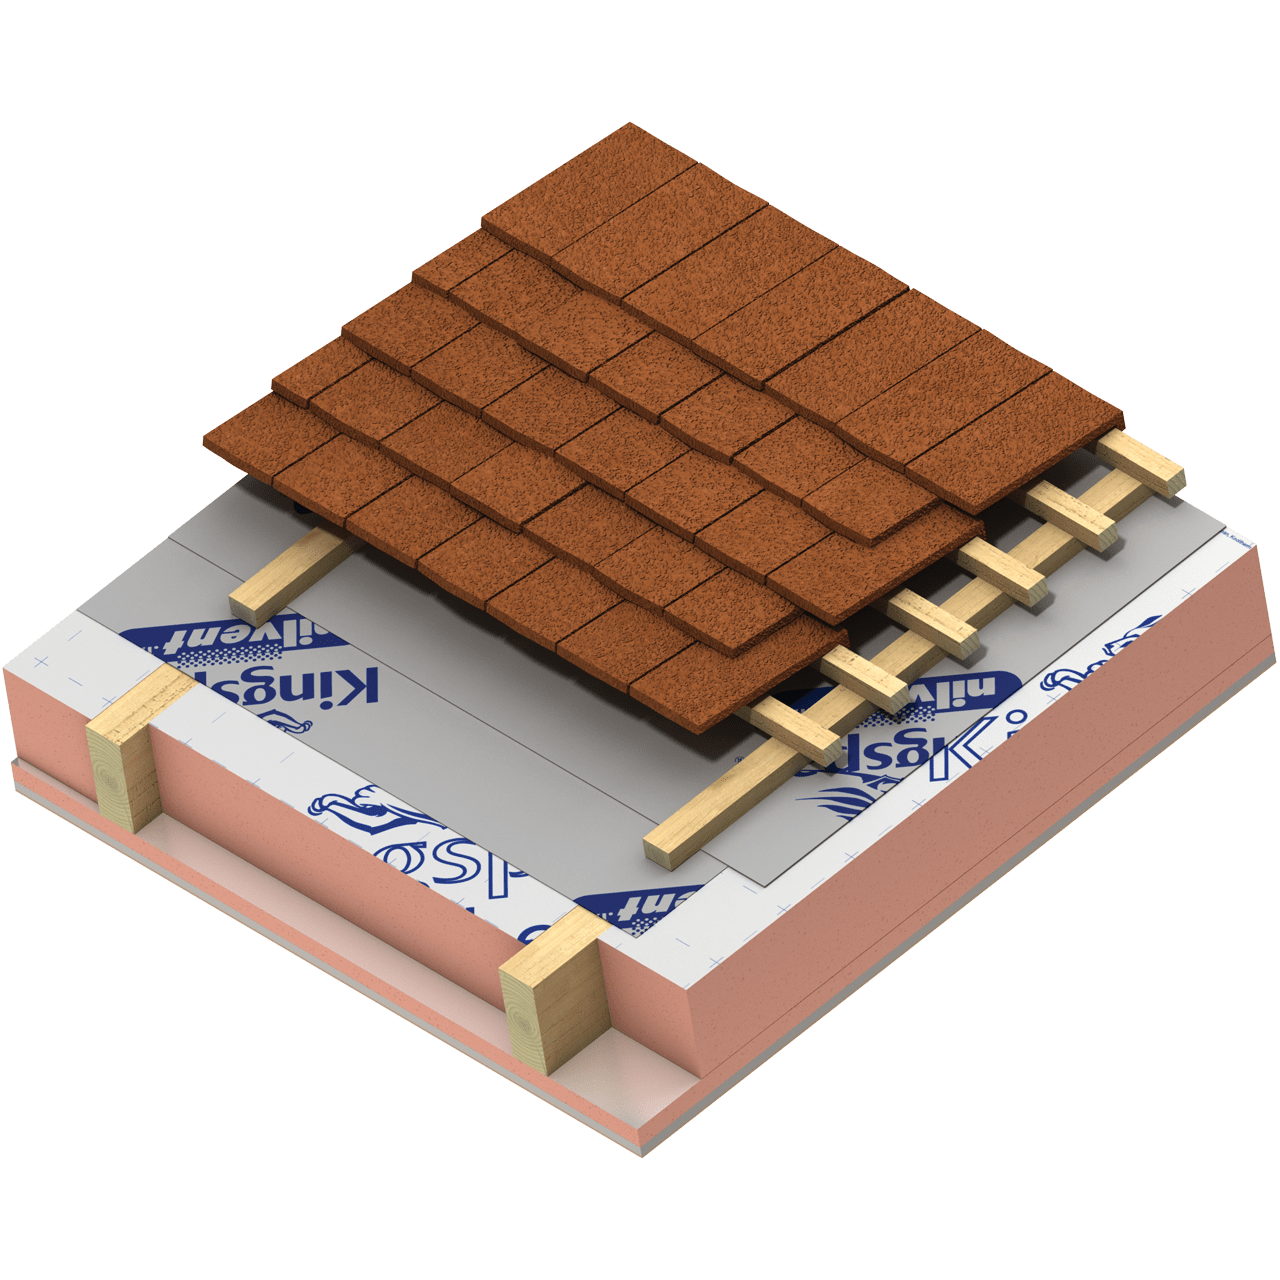 Kingspan Kingspan Kooltherm K107 Pitched Roof Insulation Board | 2400mm x 1200mm (All Sizes)